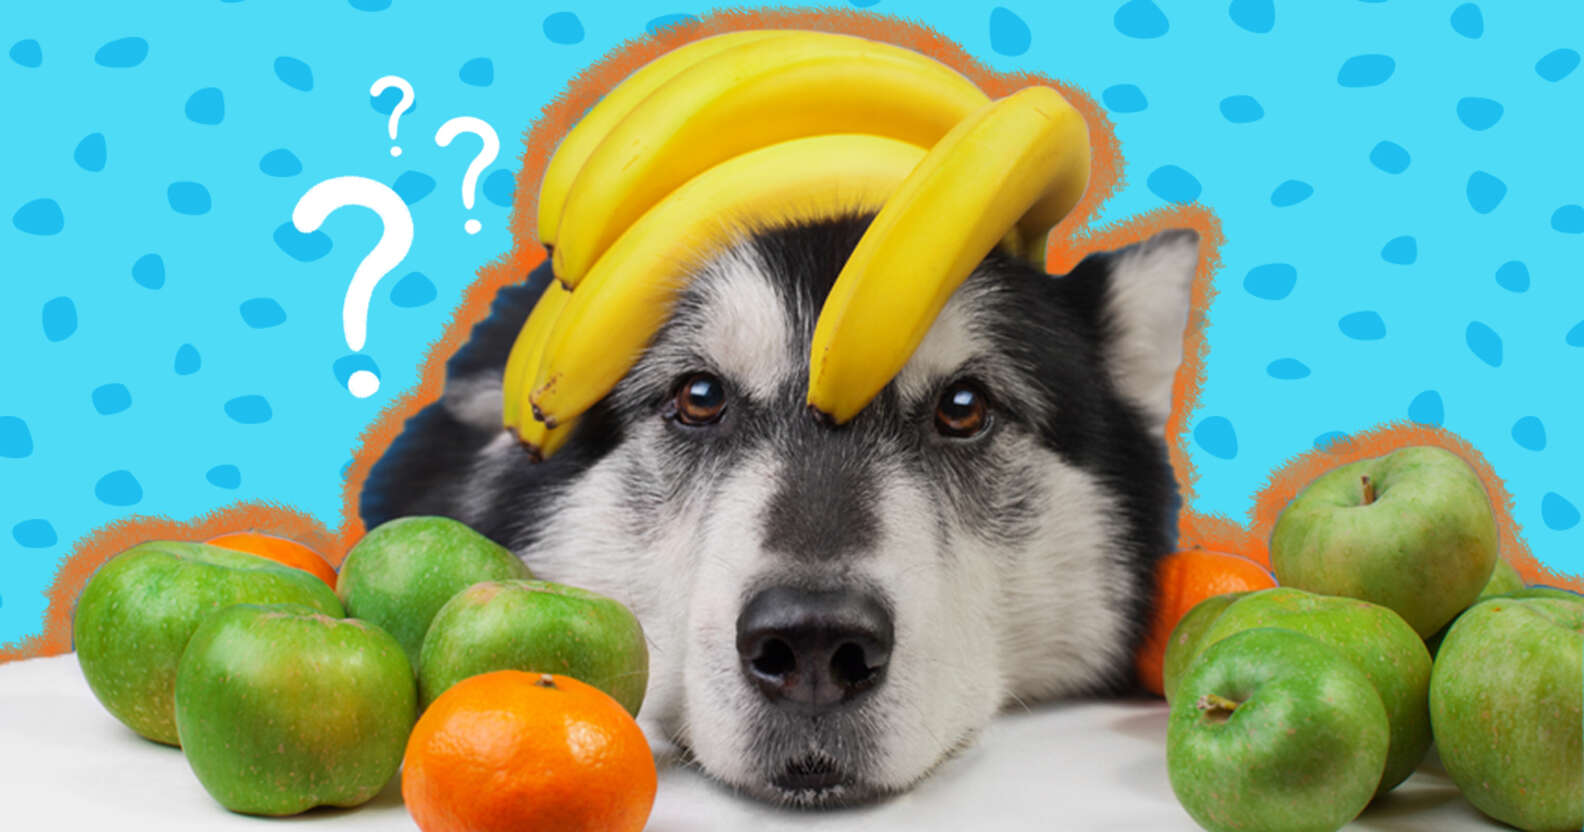 What Fruits Can Dogs Eat? 17 Safe Options And Ones To Avoid - DodoWell - The Dodo